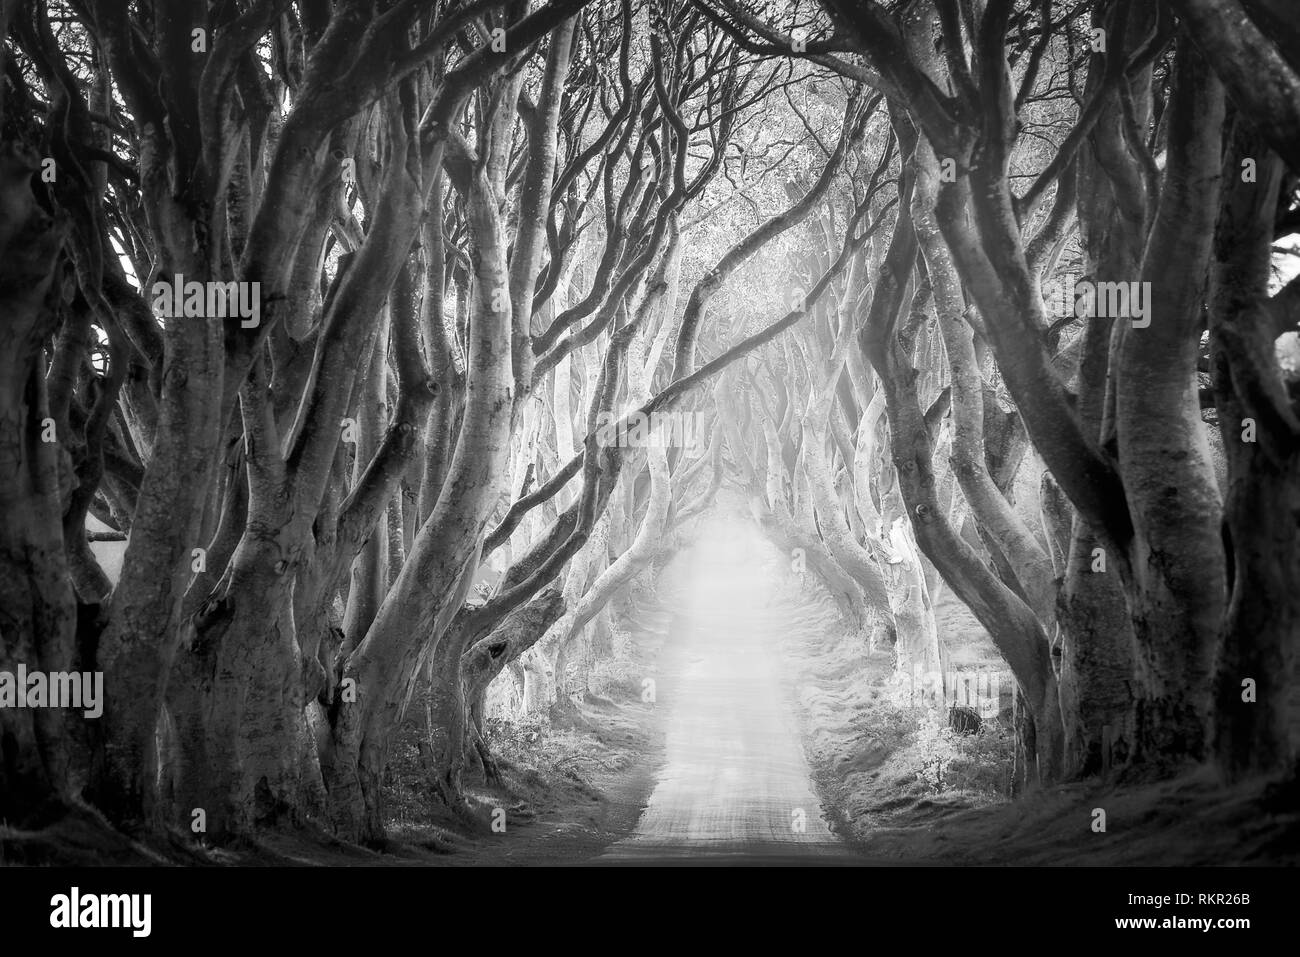 The Dark Hedges is a famous tunnel-like avenue of intertwined beech trees in Northern Ireland, and one of the most popular tourists attractions over t Stock Photo